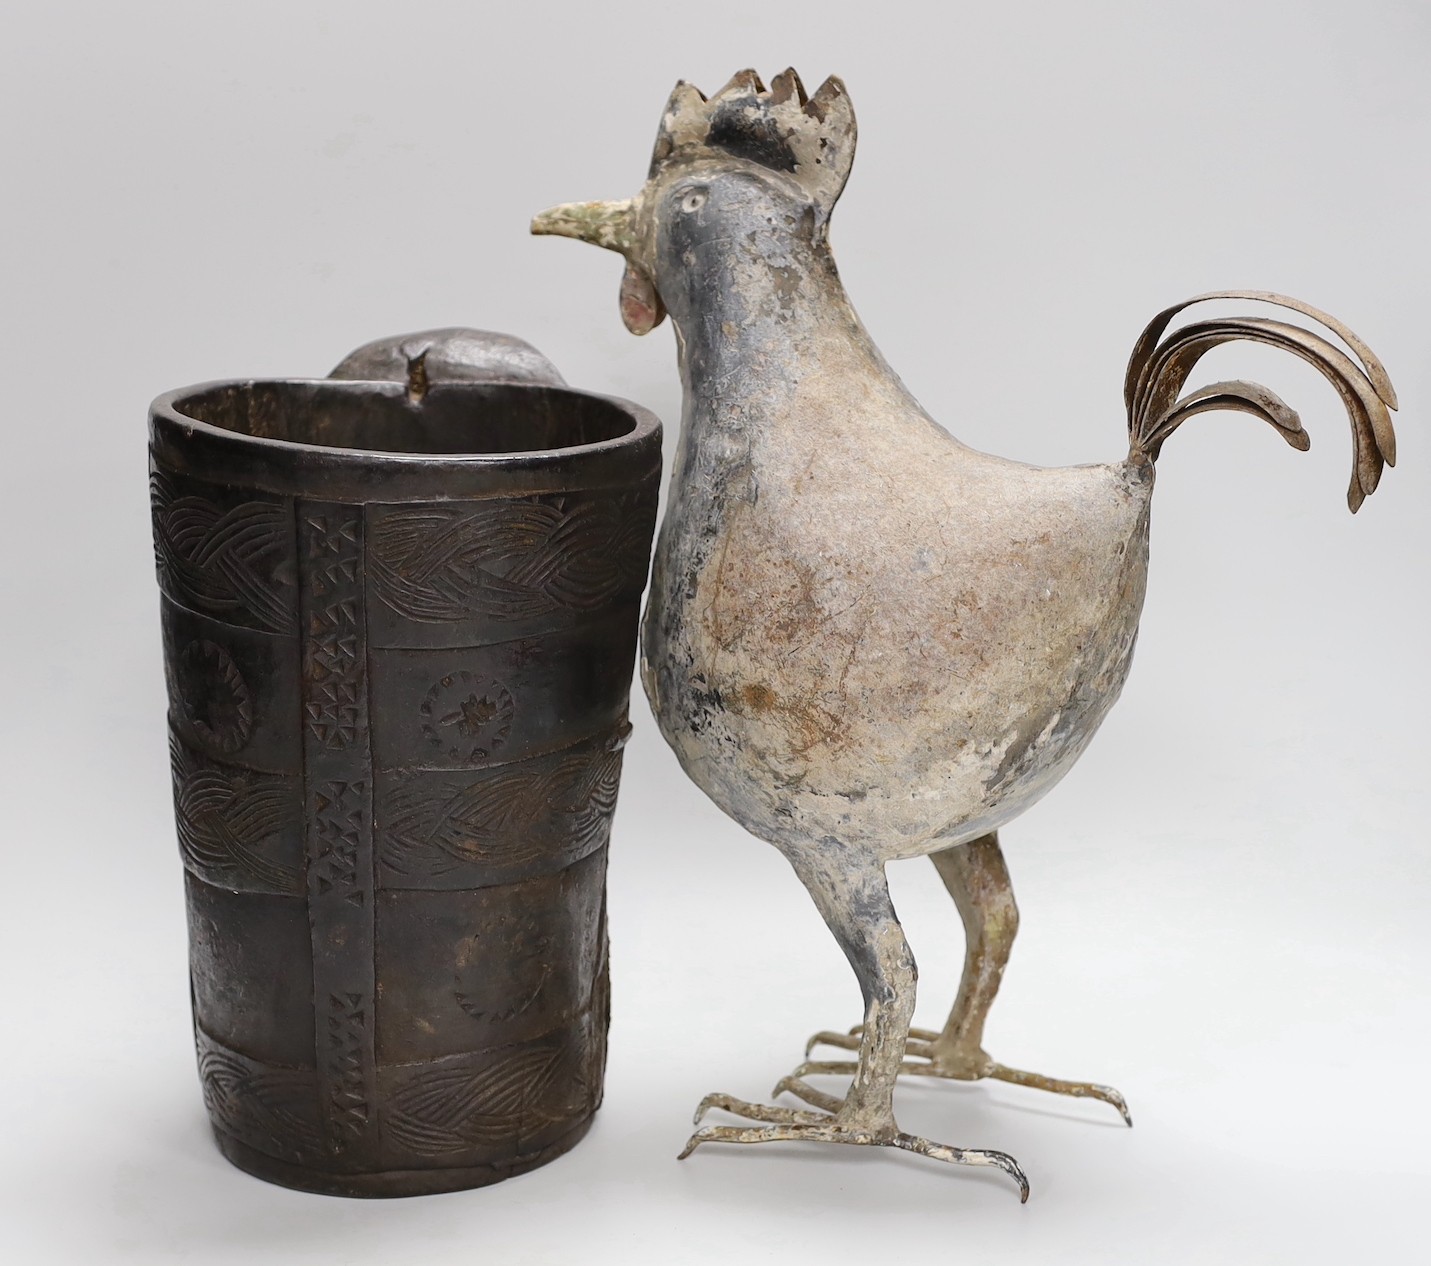 An 18th century Scandinavian carved wood tankard and a 19th century painted tin plated iron model of a cockerel, 36.5cm high.